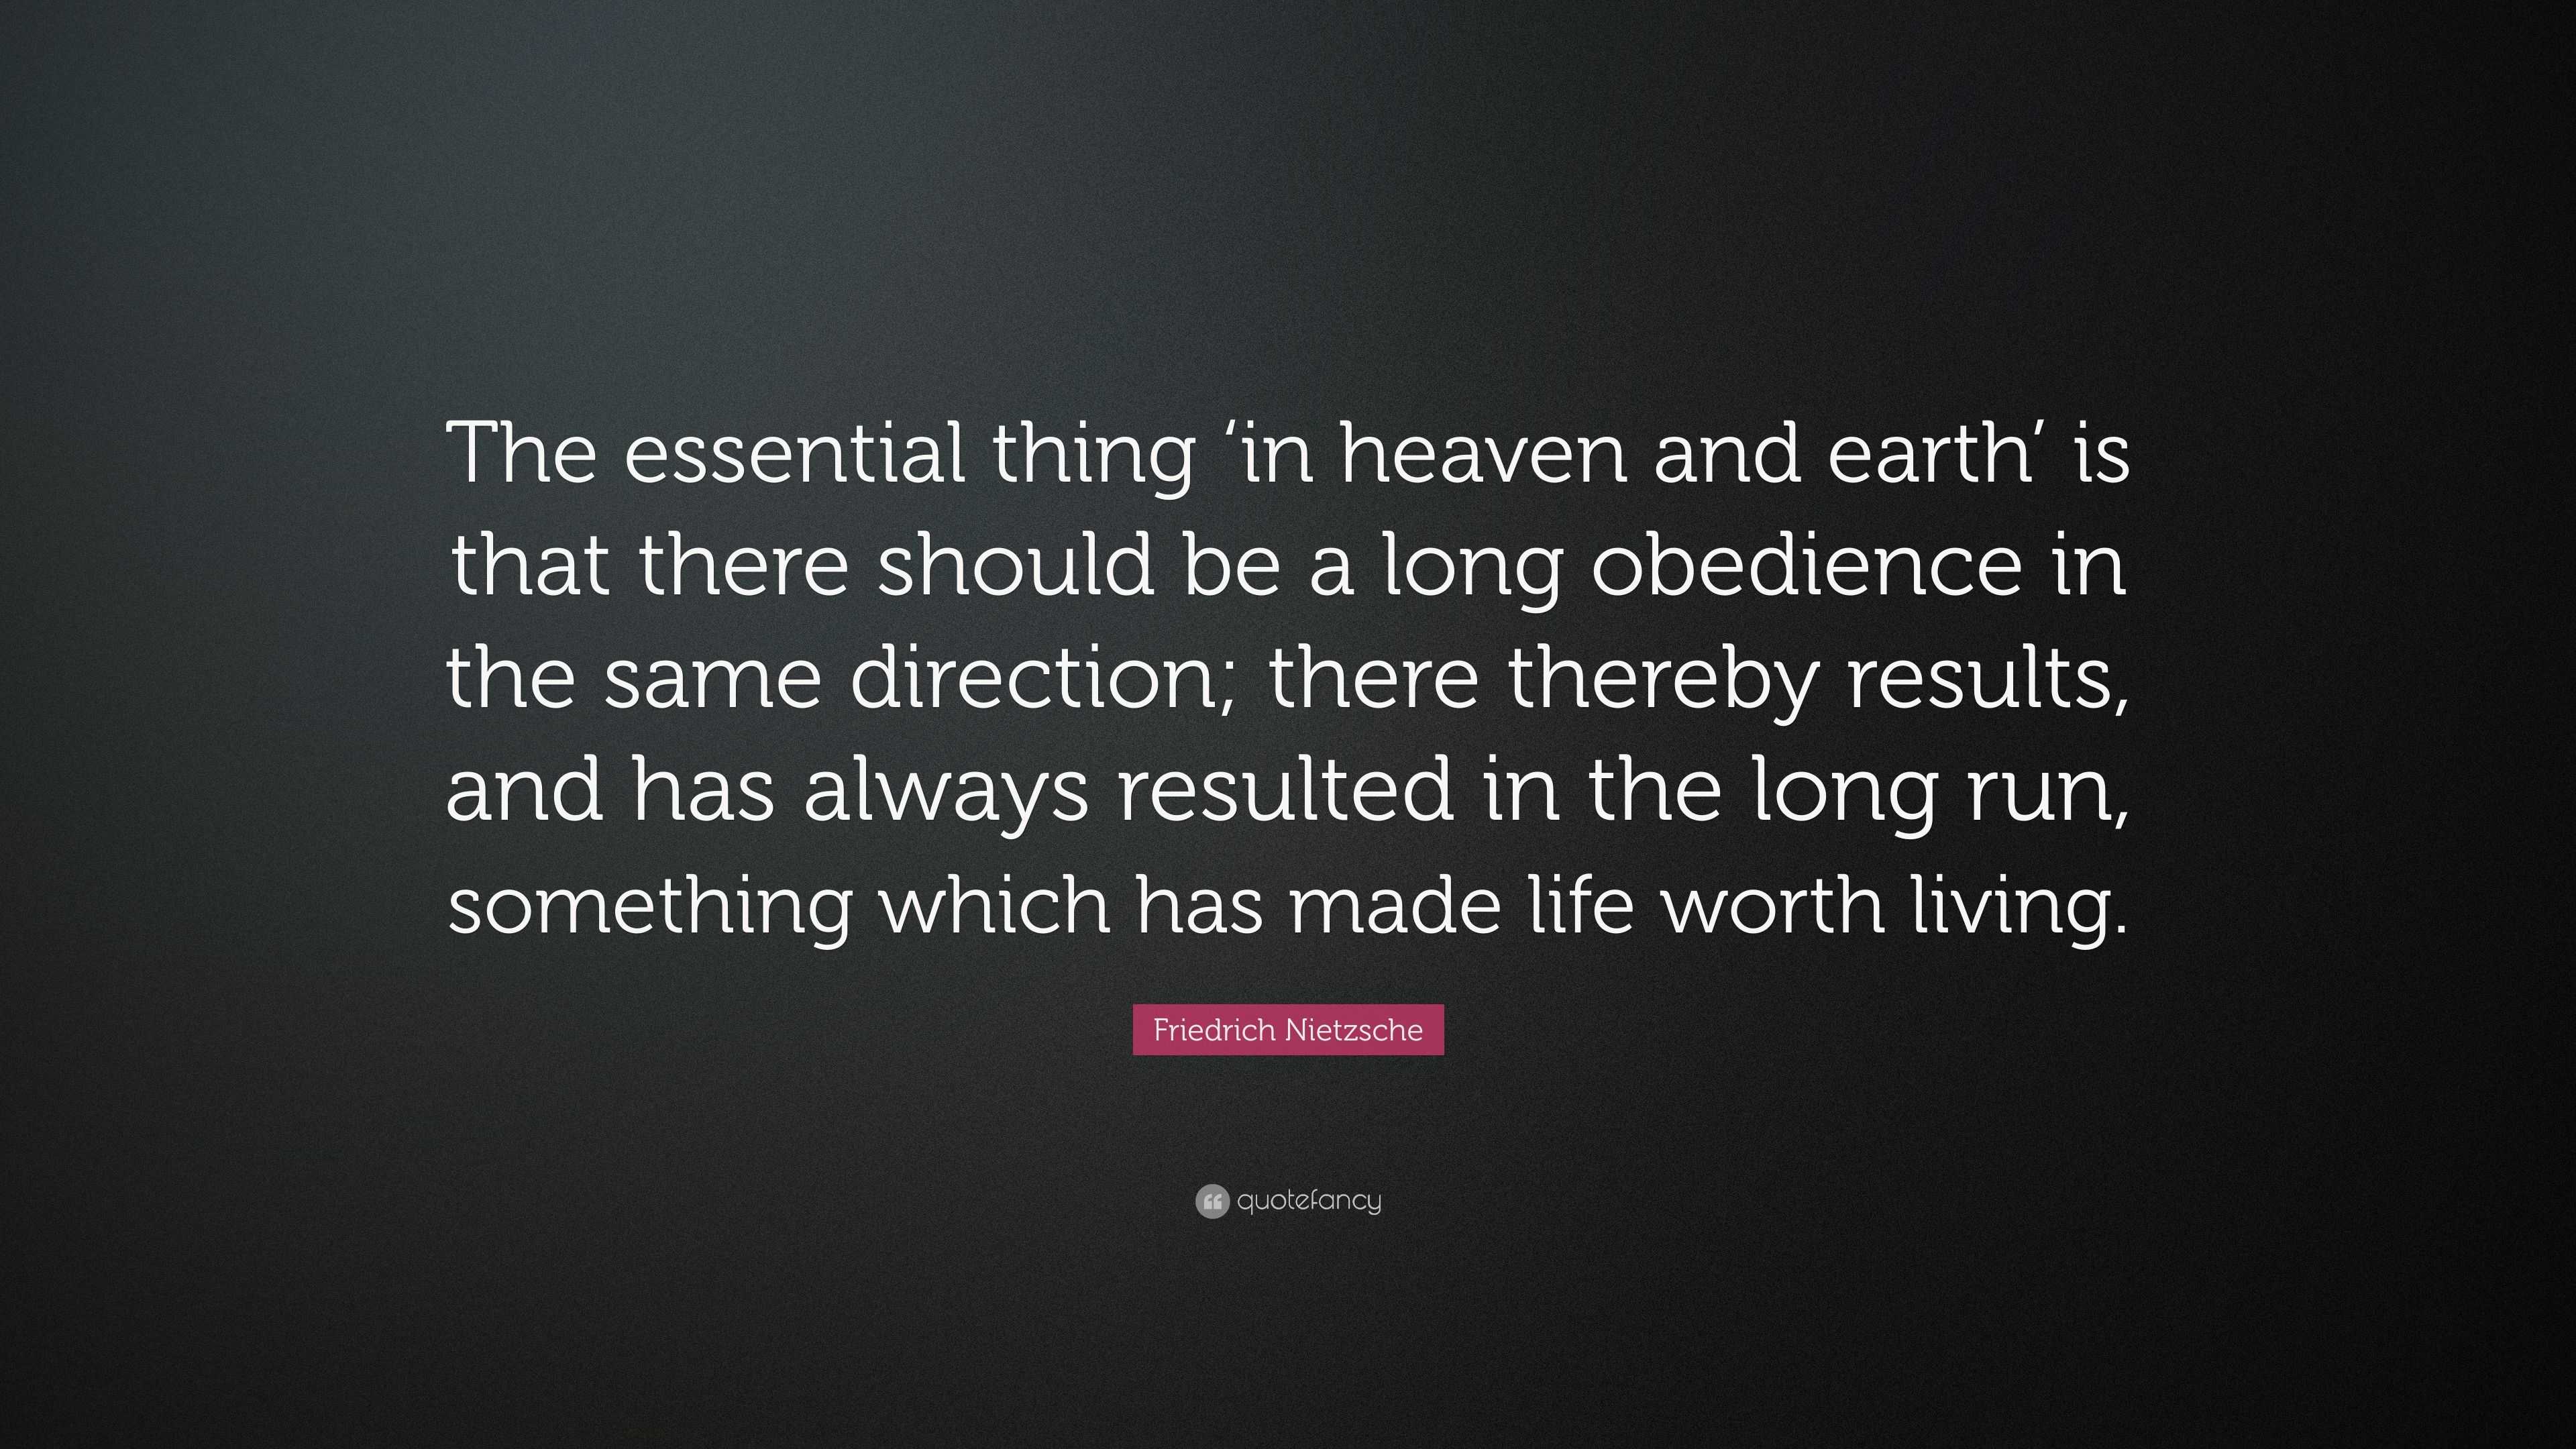 Friedrich Nietzsche Quote: "The essential thing 'in heaven and earth' is that there should be a ...